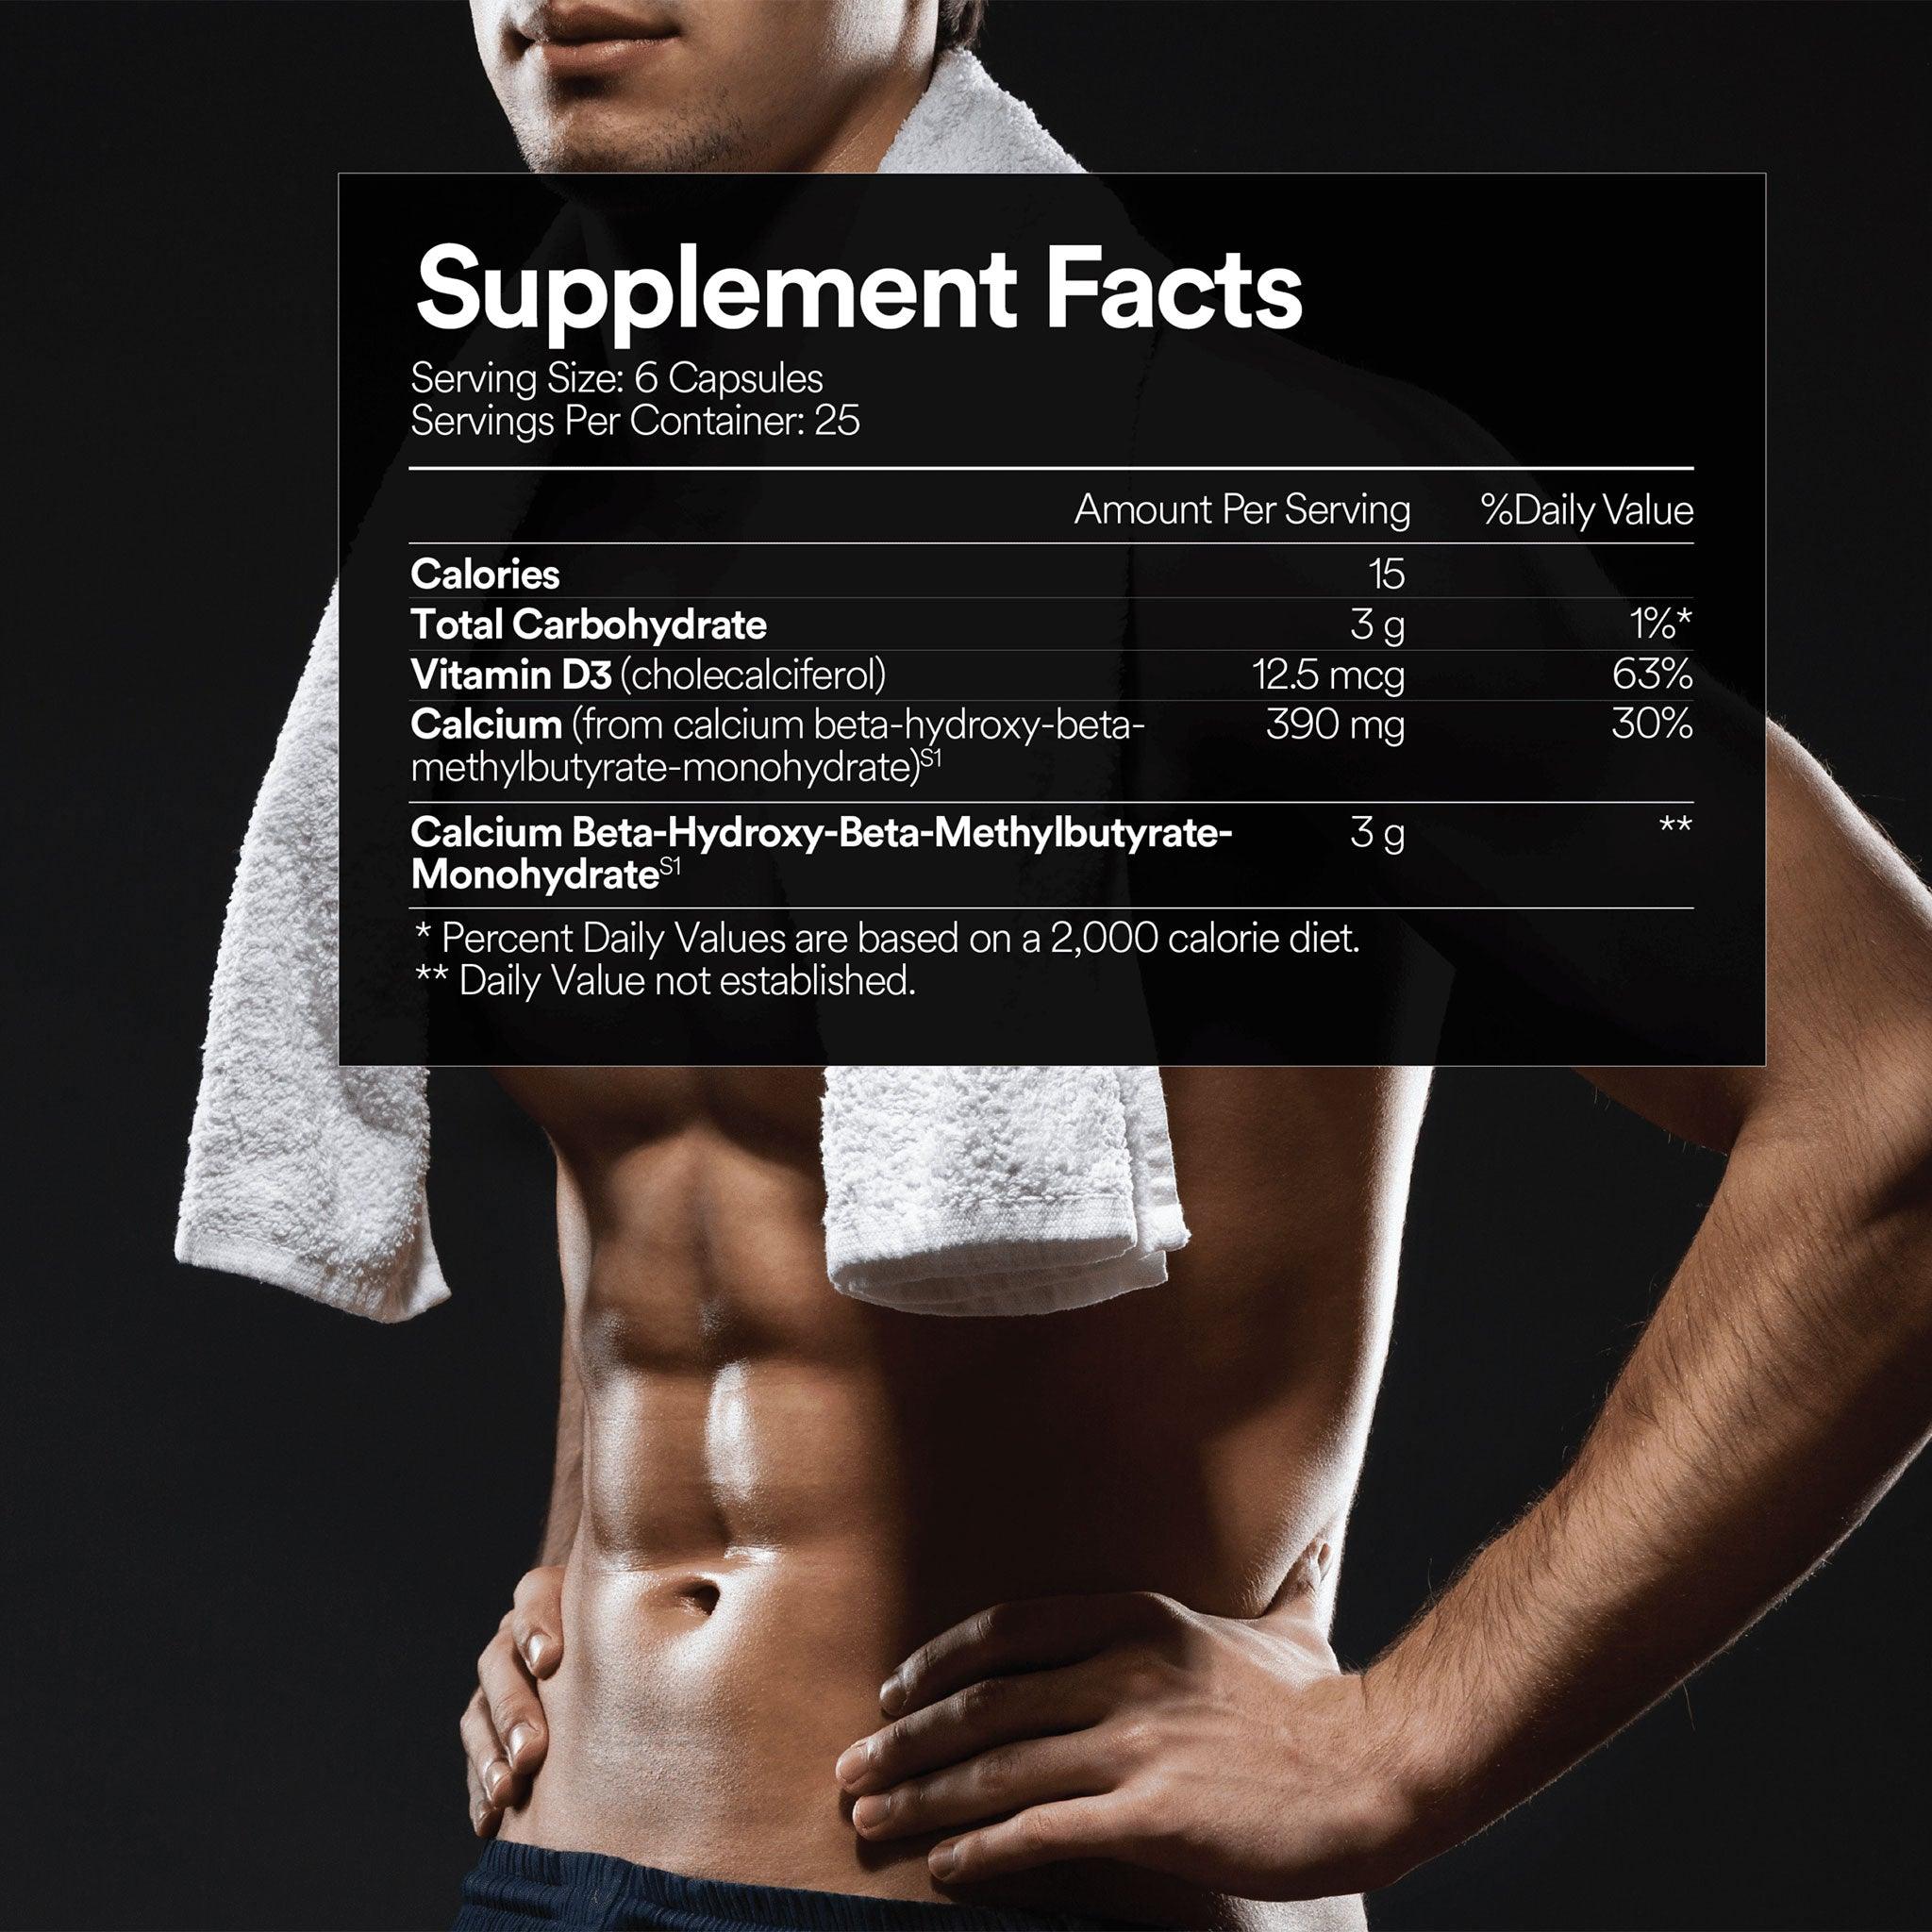 Fitties FitRestore supplement facts detail